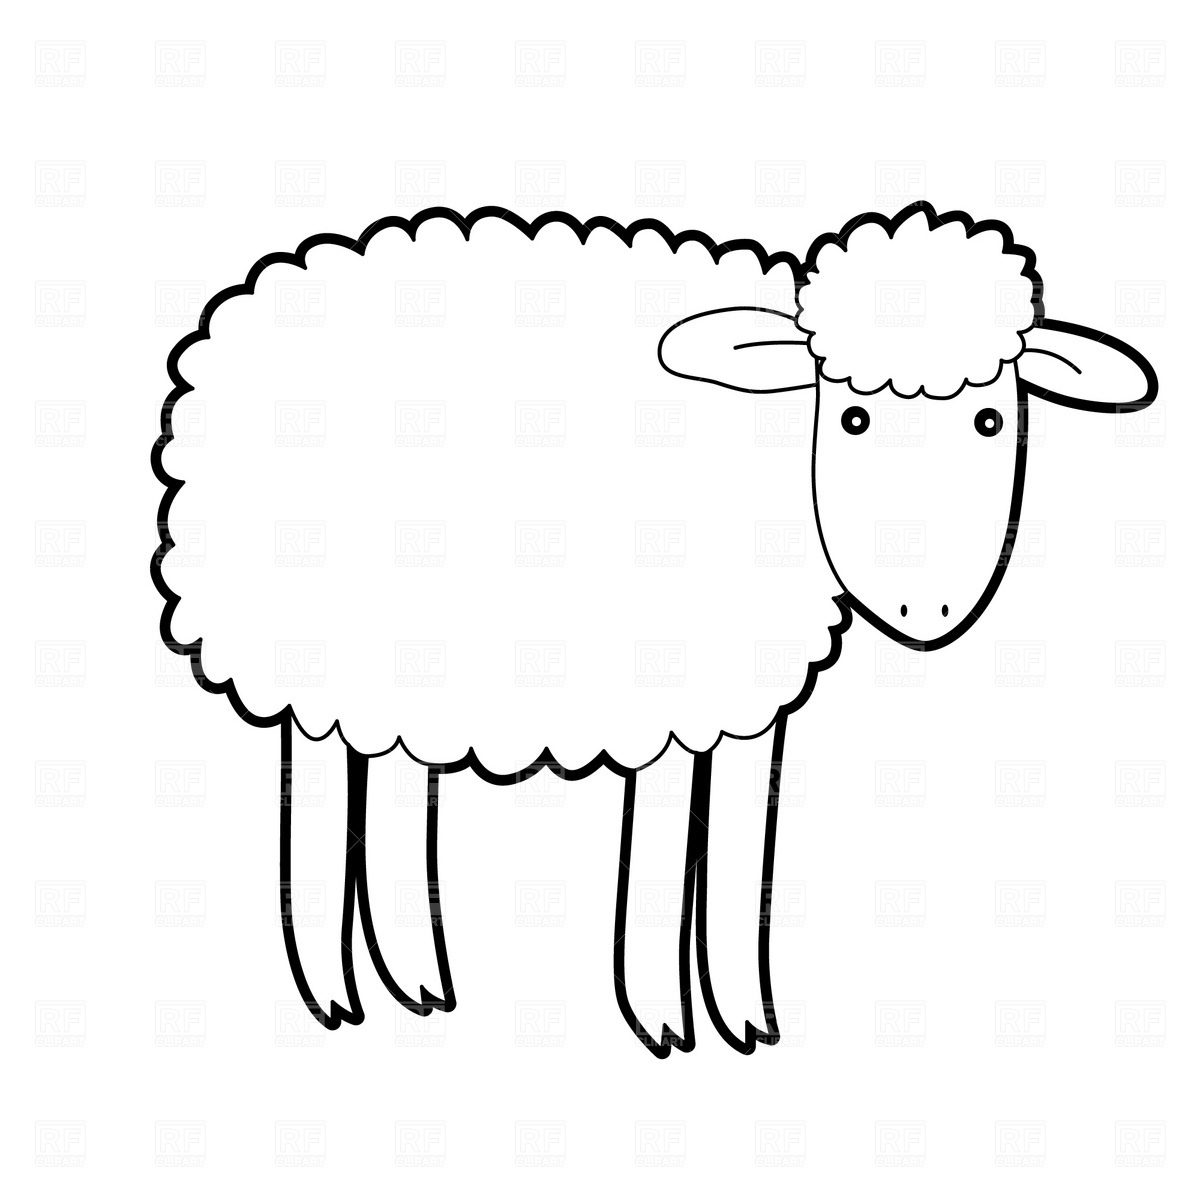 Sheep Outline | Free Download Best Sheep Outline On Clipartmag - Free Printable Pictures Of Sheep